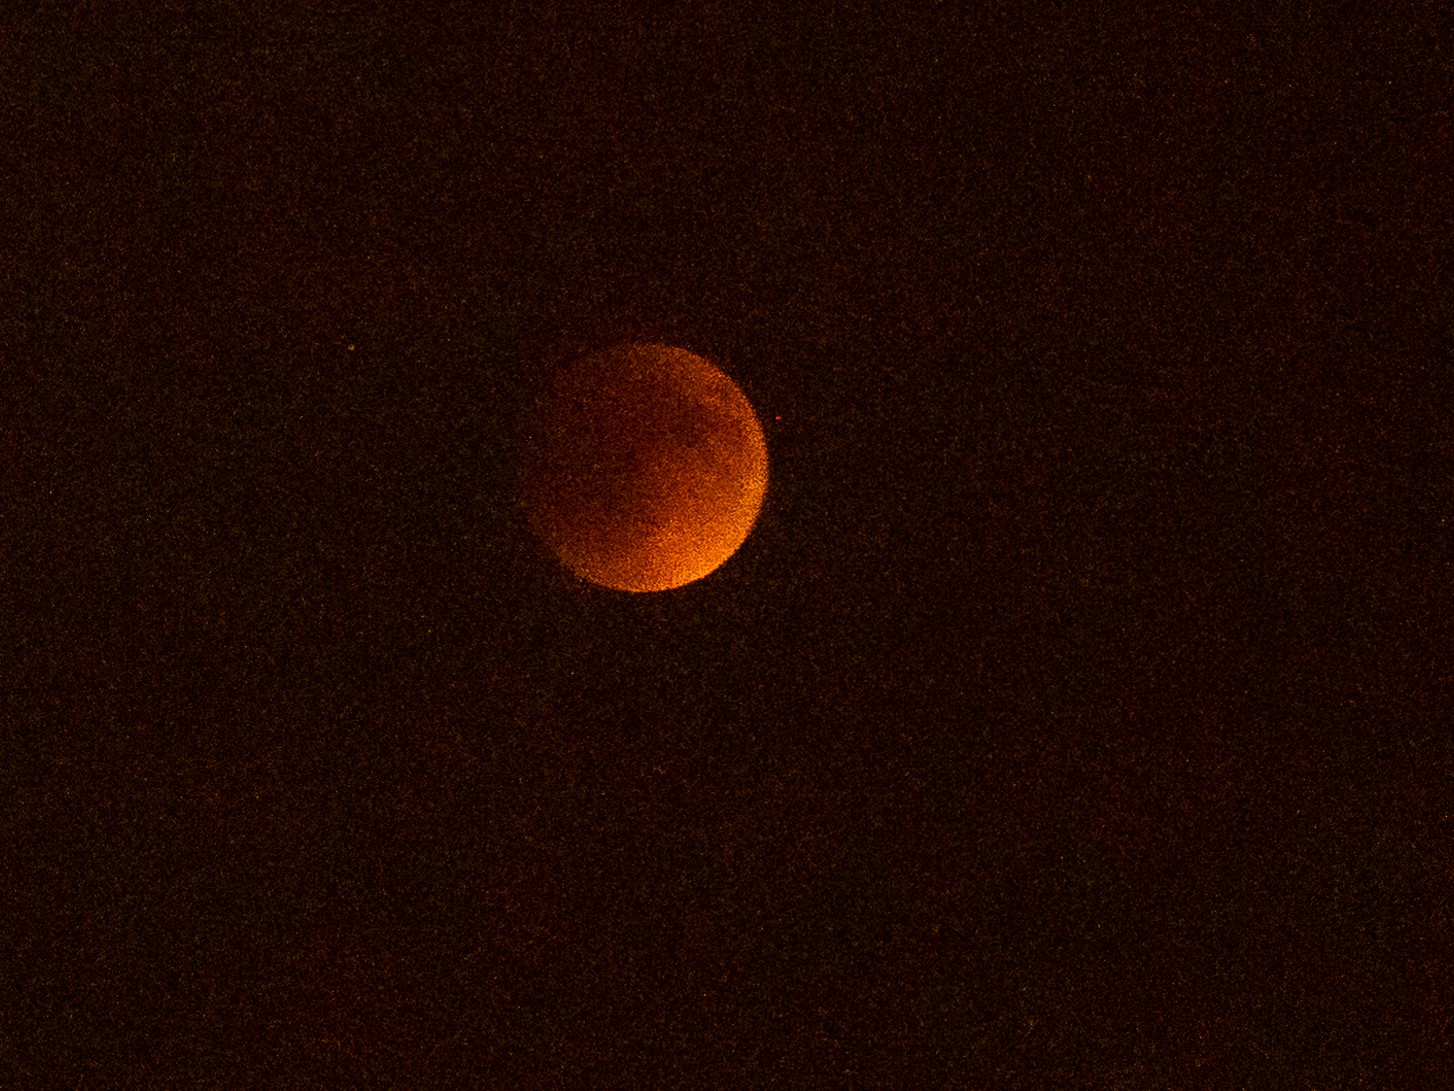 LunarEclipse2022-041 It was a very foggy night for the eclipse, so there was only a 15 minute window during which the moon was visible before the sky became a complete whiteout.and...